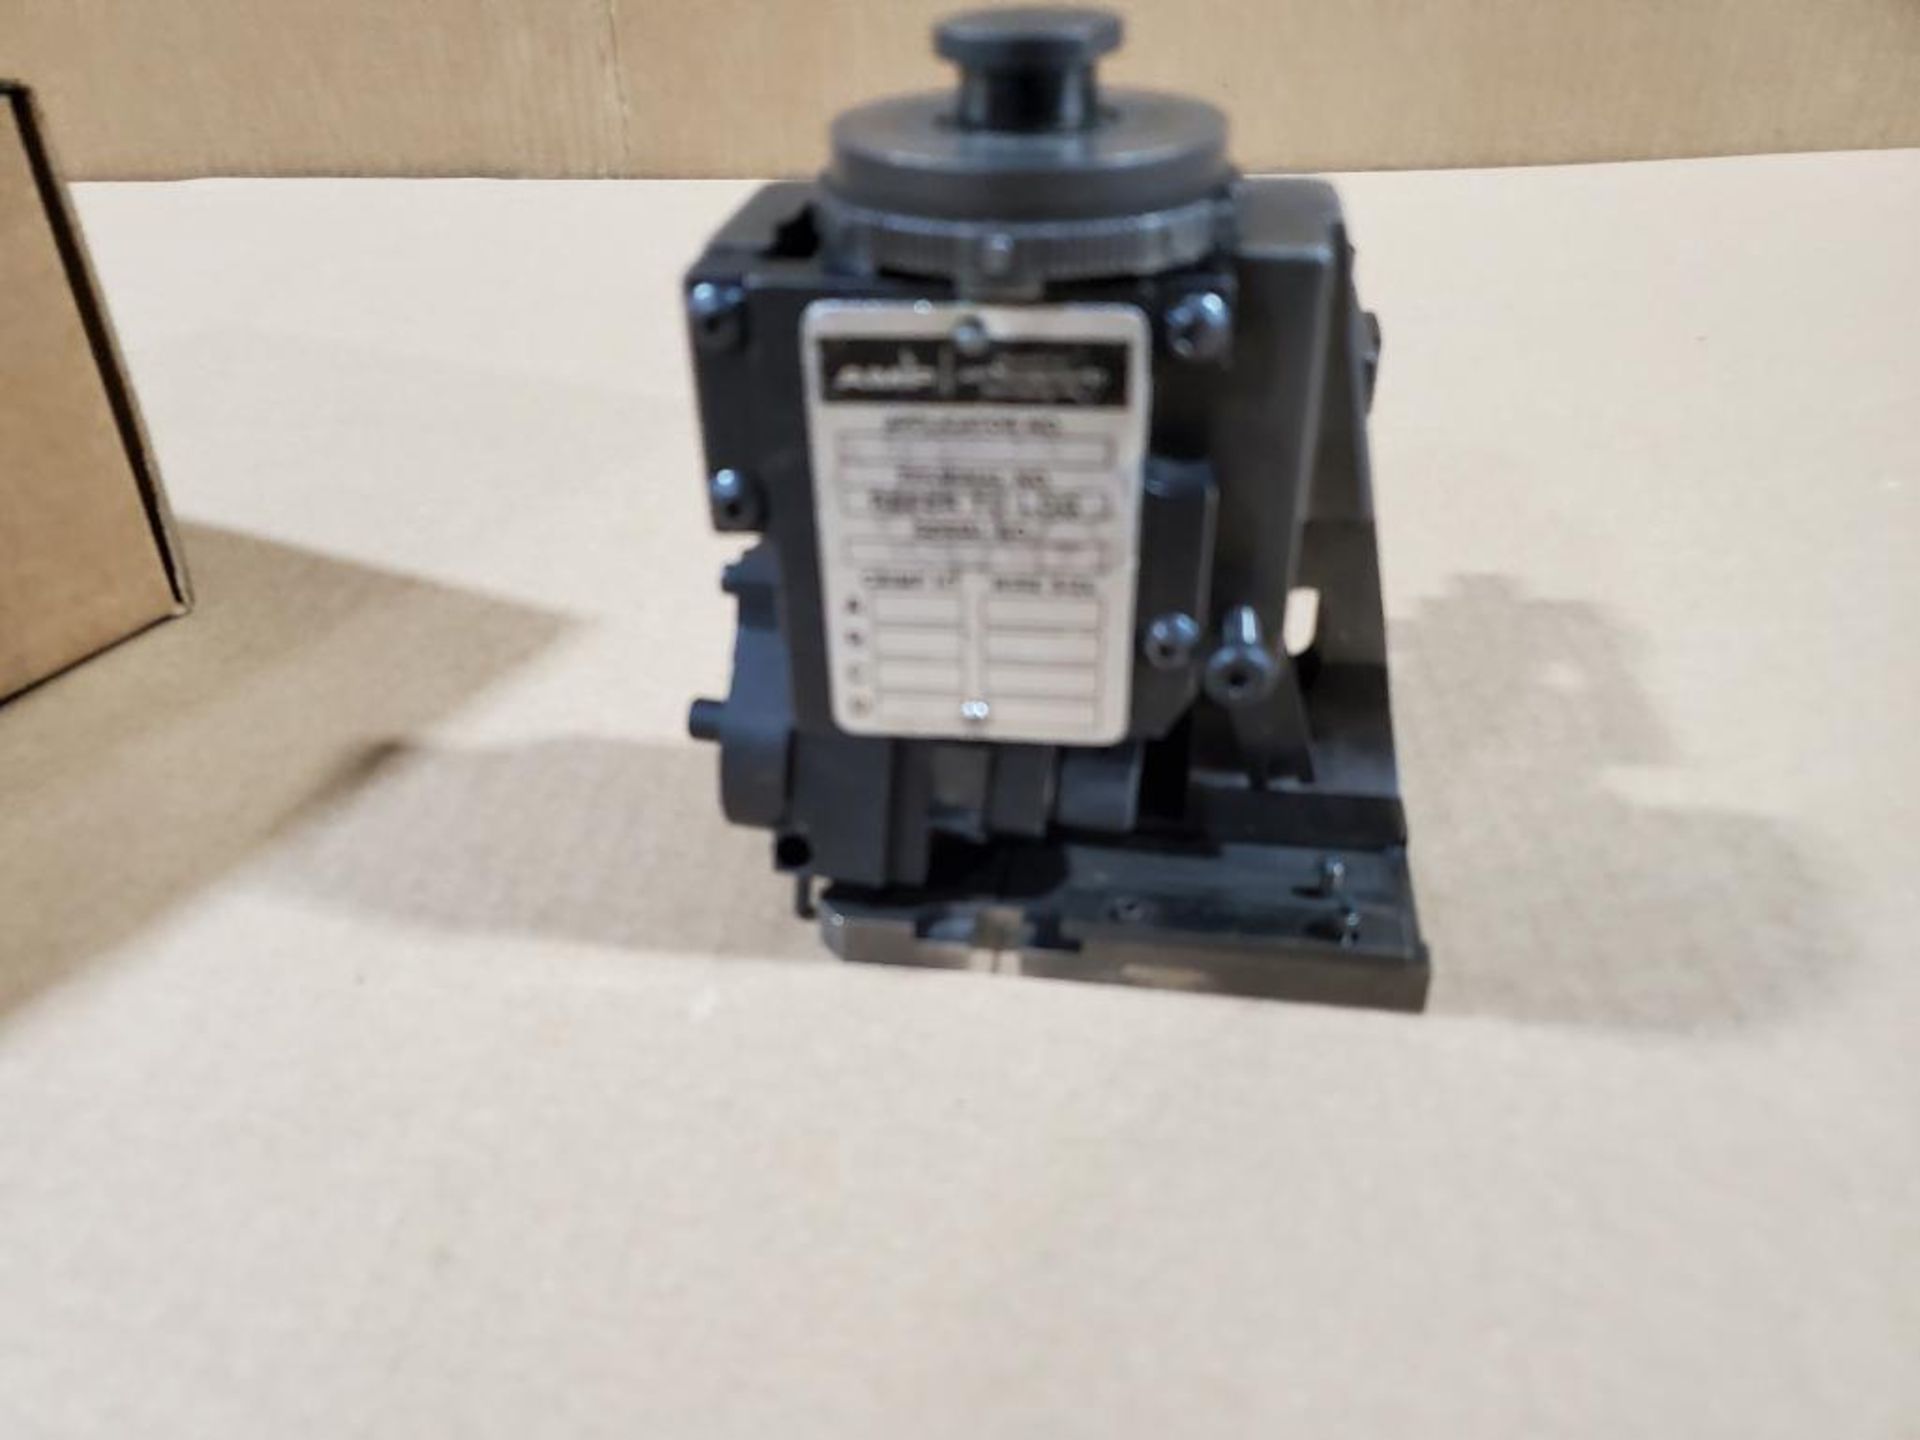 Amp wire terminal applicator. Number 567200-3-N. - Image 2 of 7